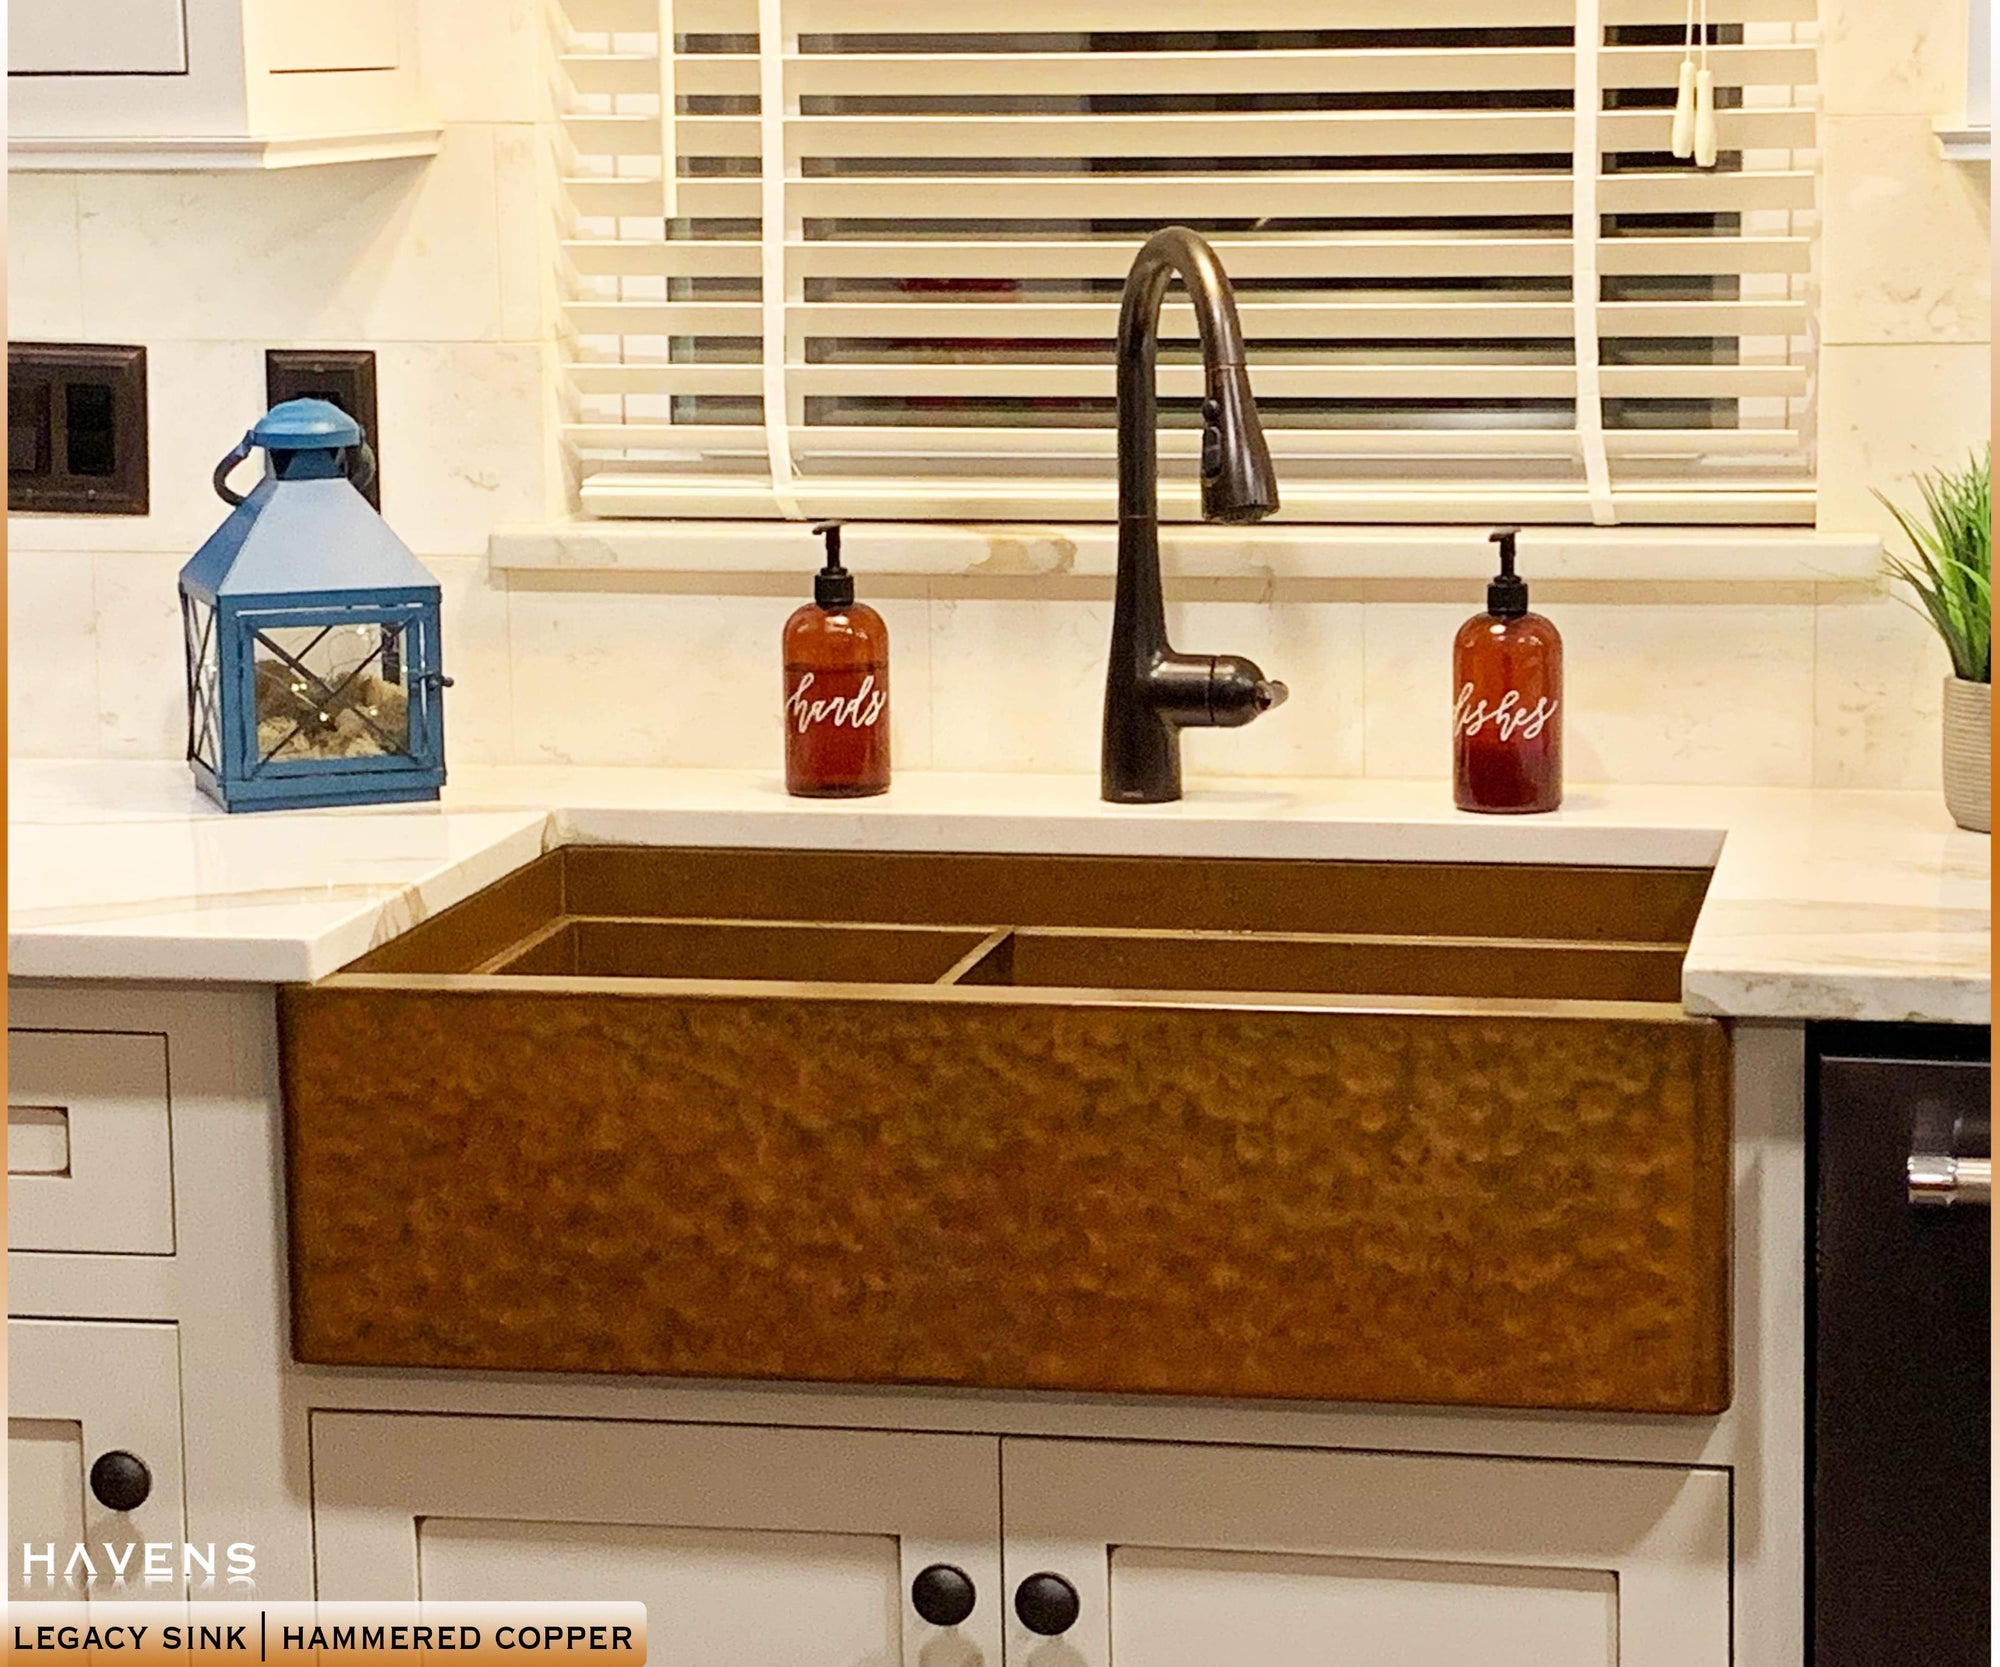 Legacy Farmhouse sink in hammered copper with drop in bowl along advanced sink ledge 